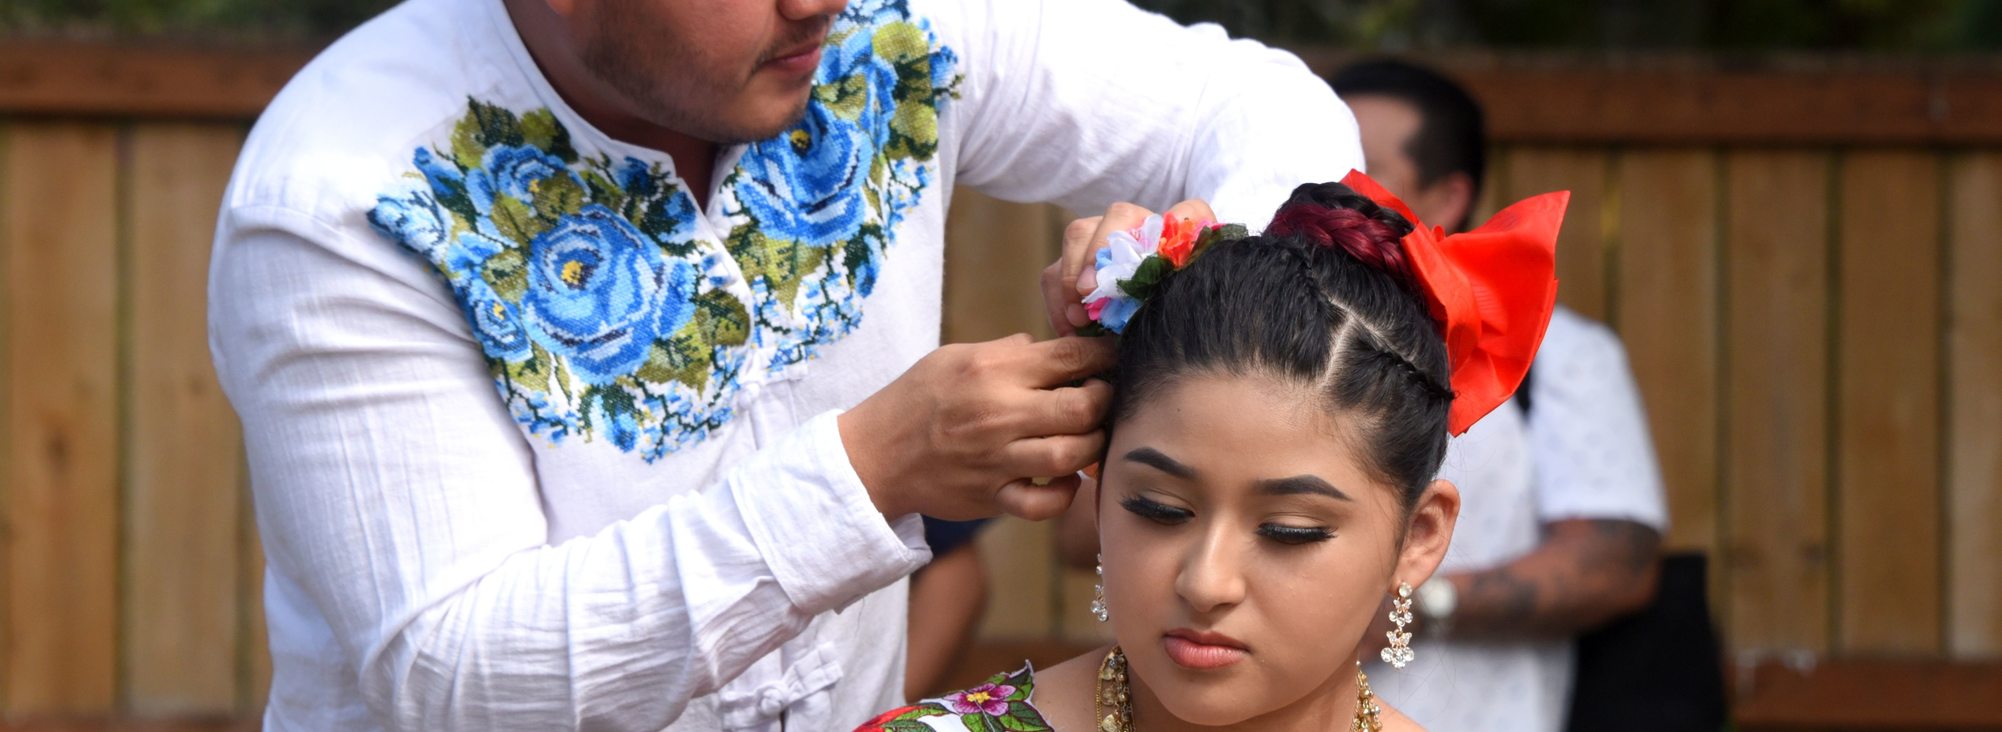 A person in a white shirt with blue flowers on the chest fixing a flower in the hair of another person wearing a multi-colored floral dress at the Mayan Culture and Tradition Fest